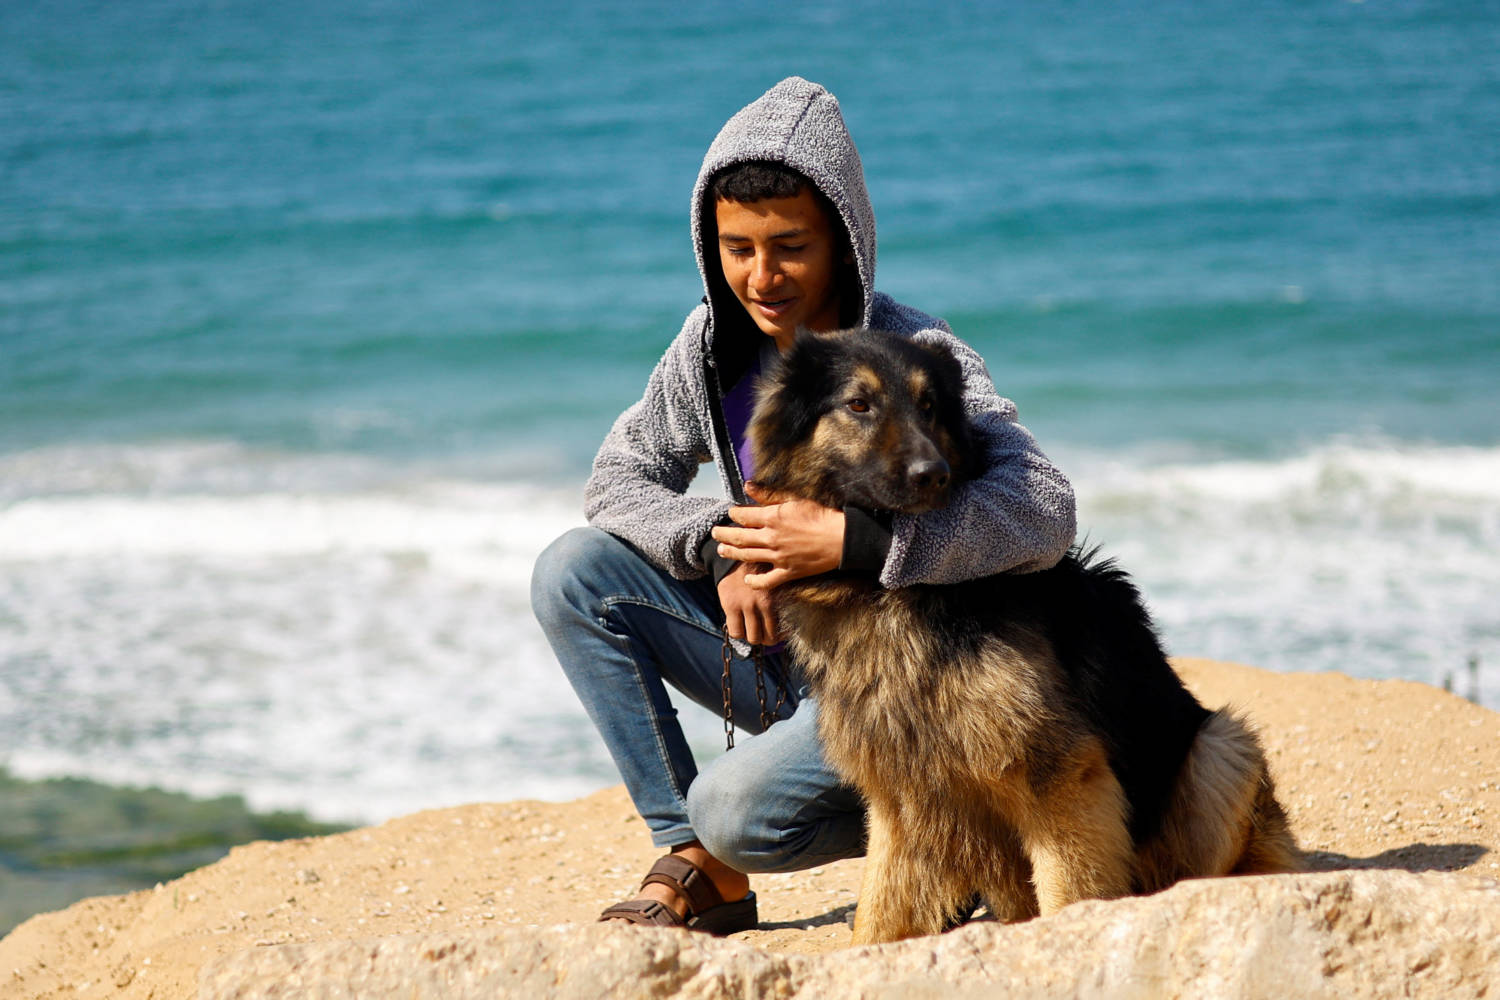 Gaza Teenager Struggles To Look After His Dogs In At A Displacement Camp In Rafah